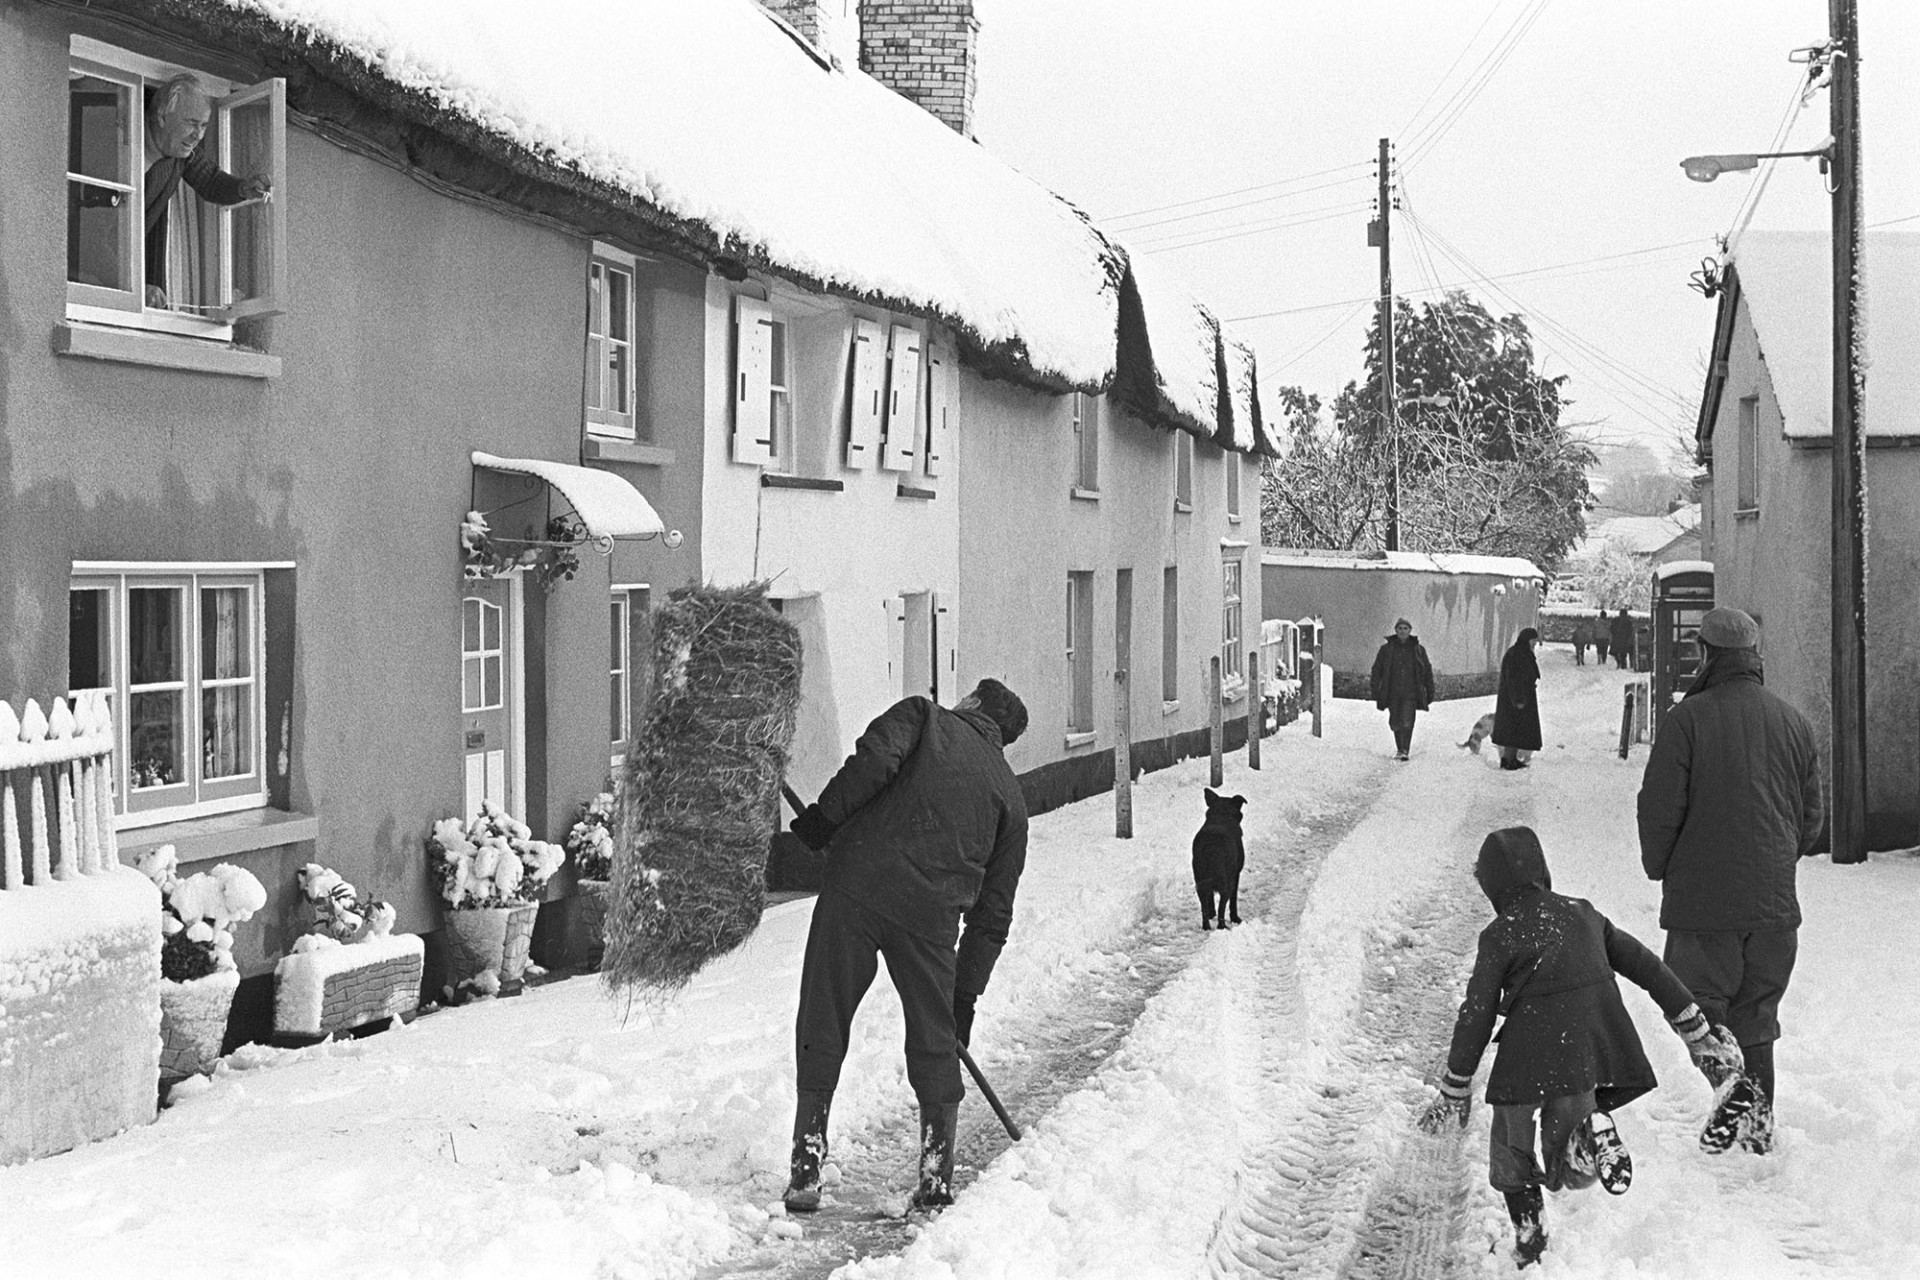 Snow, man taking hay through village to fields, woman with dog.
[A man carrying a bale of hay, possibly Harold Nott, in Fore Street, Dolton, on his way to feed sheep in the snow. He is talking to a man leaning out of a cottage window. A man and child are walking past in the snowy street. Further down the street are a dog and several people walking through the snow.]